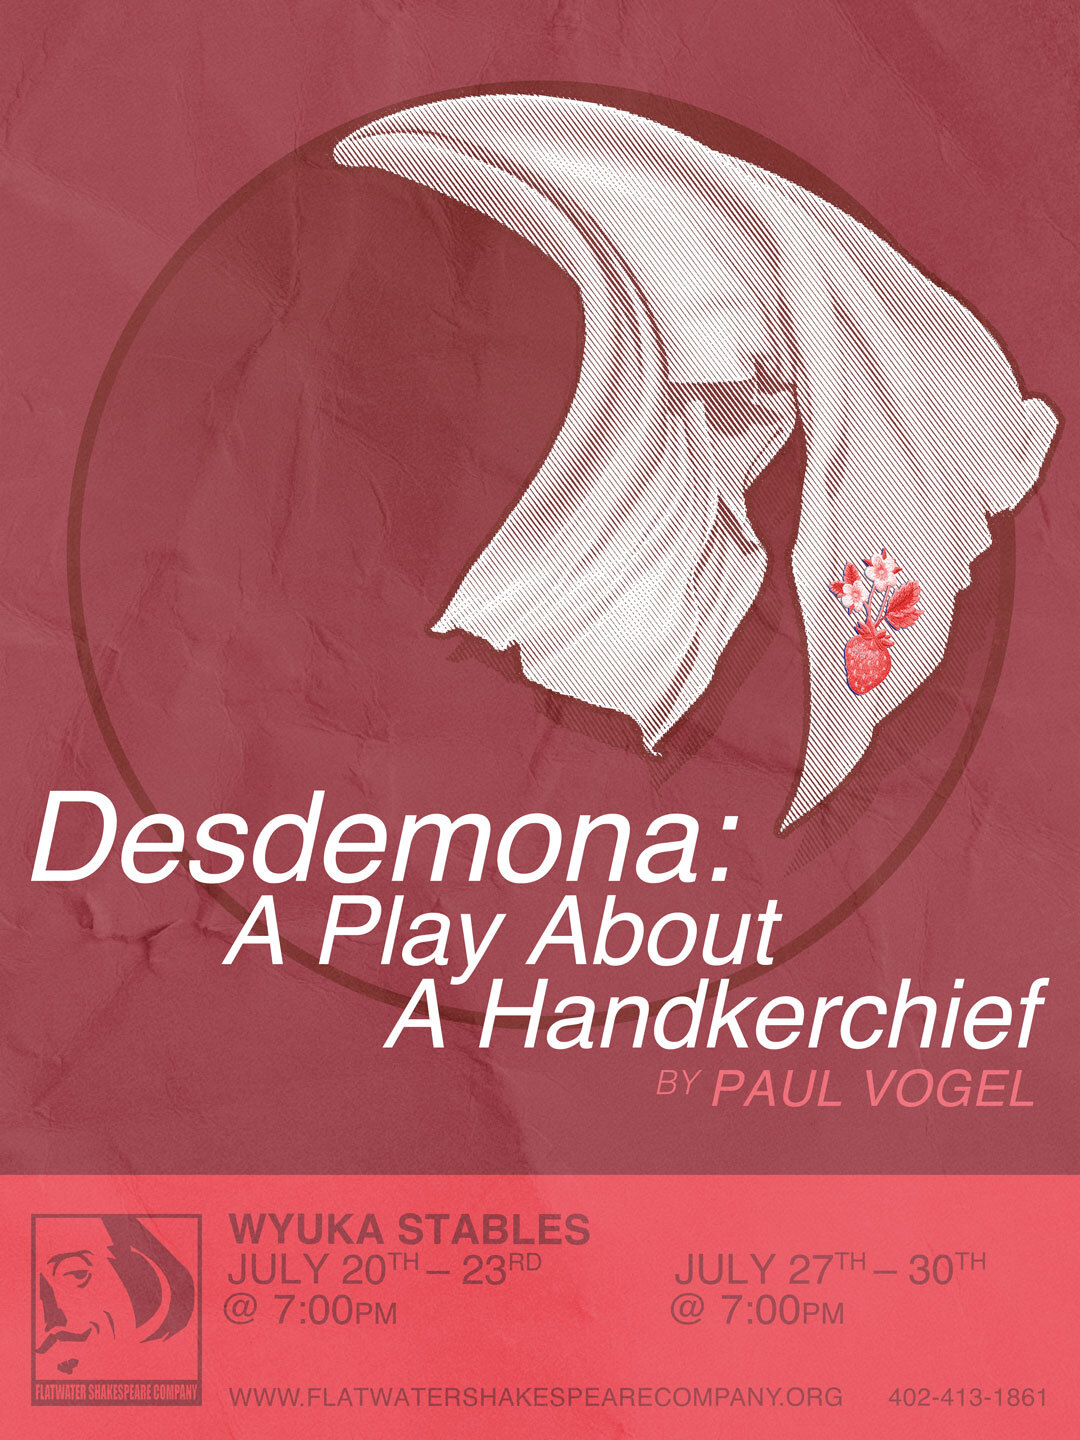 7/27 ADU - ADULT: Thurs. July 27, 2023 | 7:00 p.m. - 10:00 p.m. CST | Wyuka Stables (Desdemona: A Play about a Handkerchief)